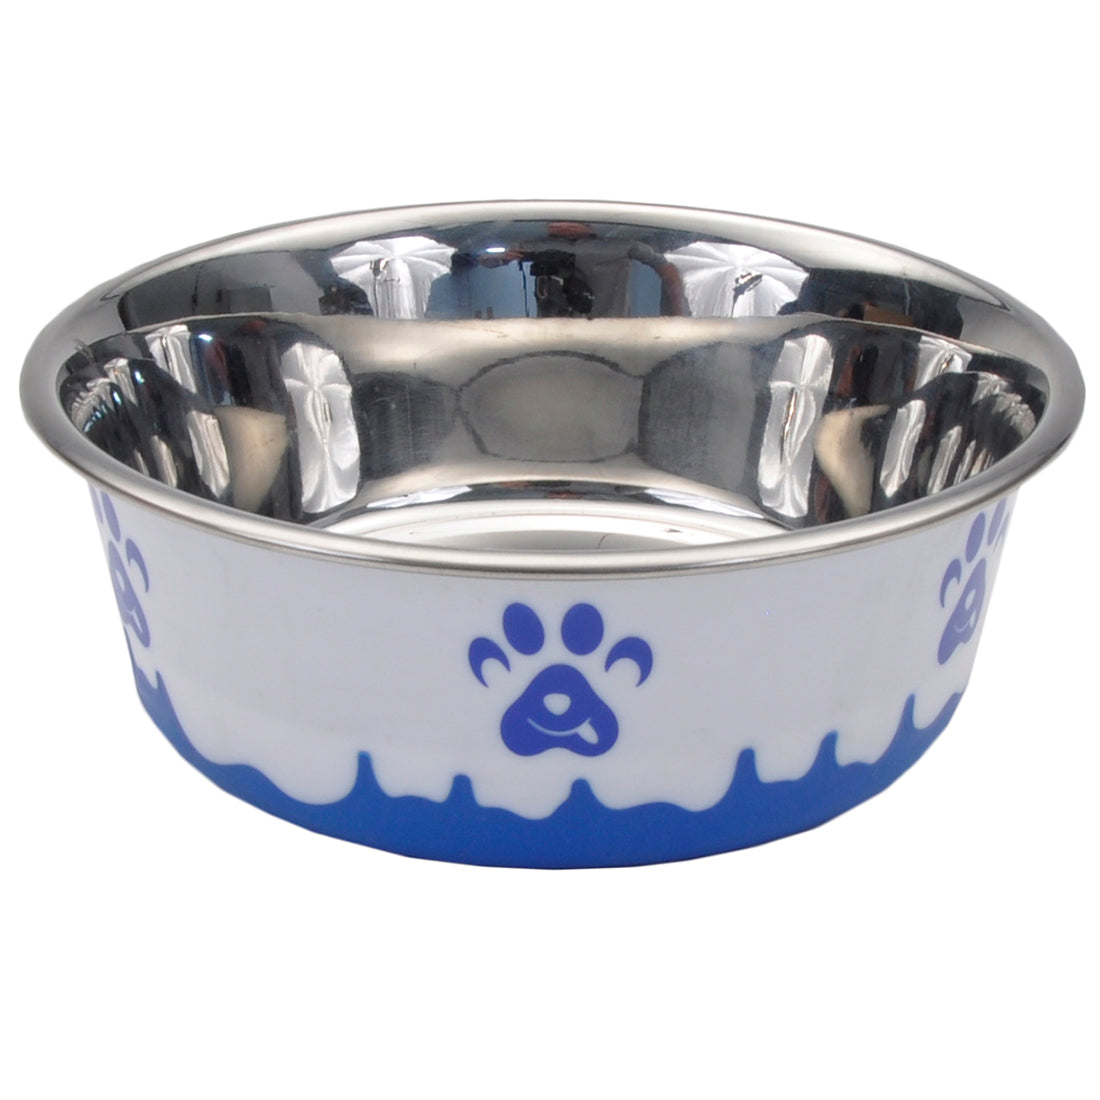 Non-Skid Paw Design Dog Bowls by Maslow, Blue